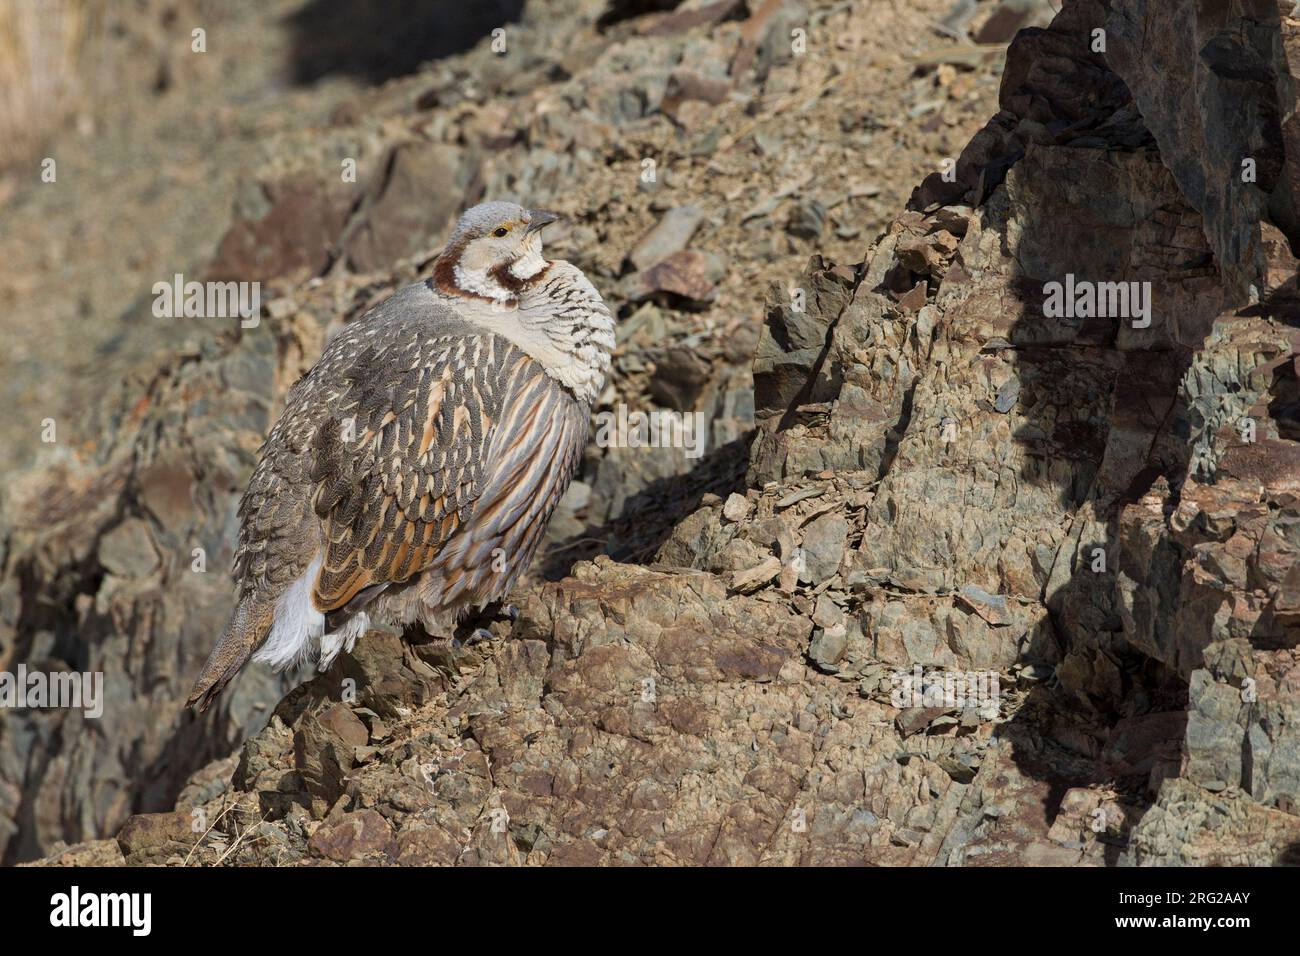 Himalayan snowcock (Tetraogallus himalayensis) perched on a rock in the mountains Stock Photo